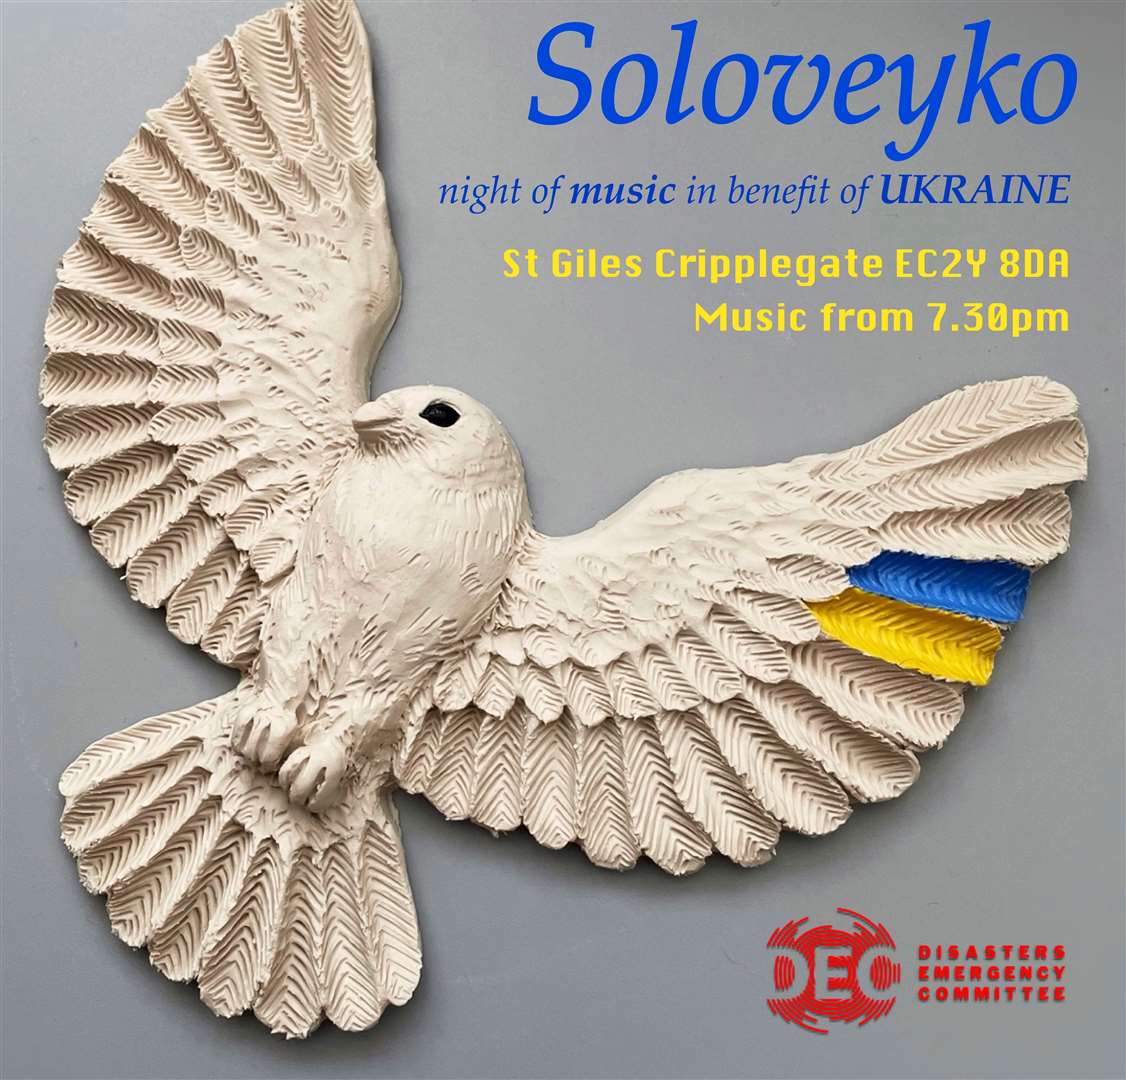 The concert will be held next Friday, with all the proceeds going to the Disasters Emergency Committee (DEC) Ukraine Appeal. Picture: Anastasia Egorova